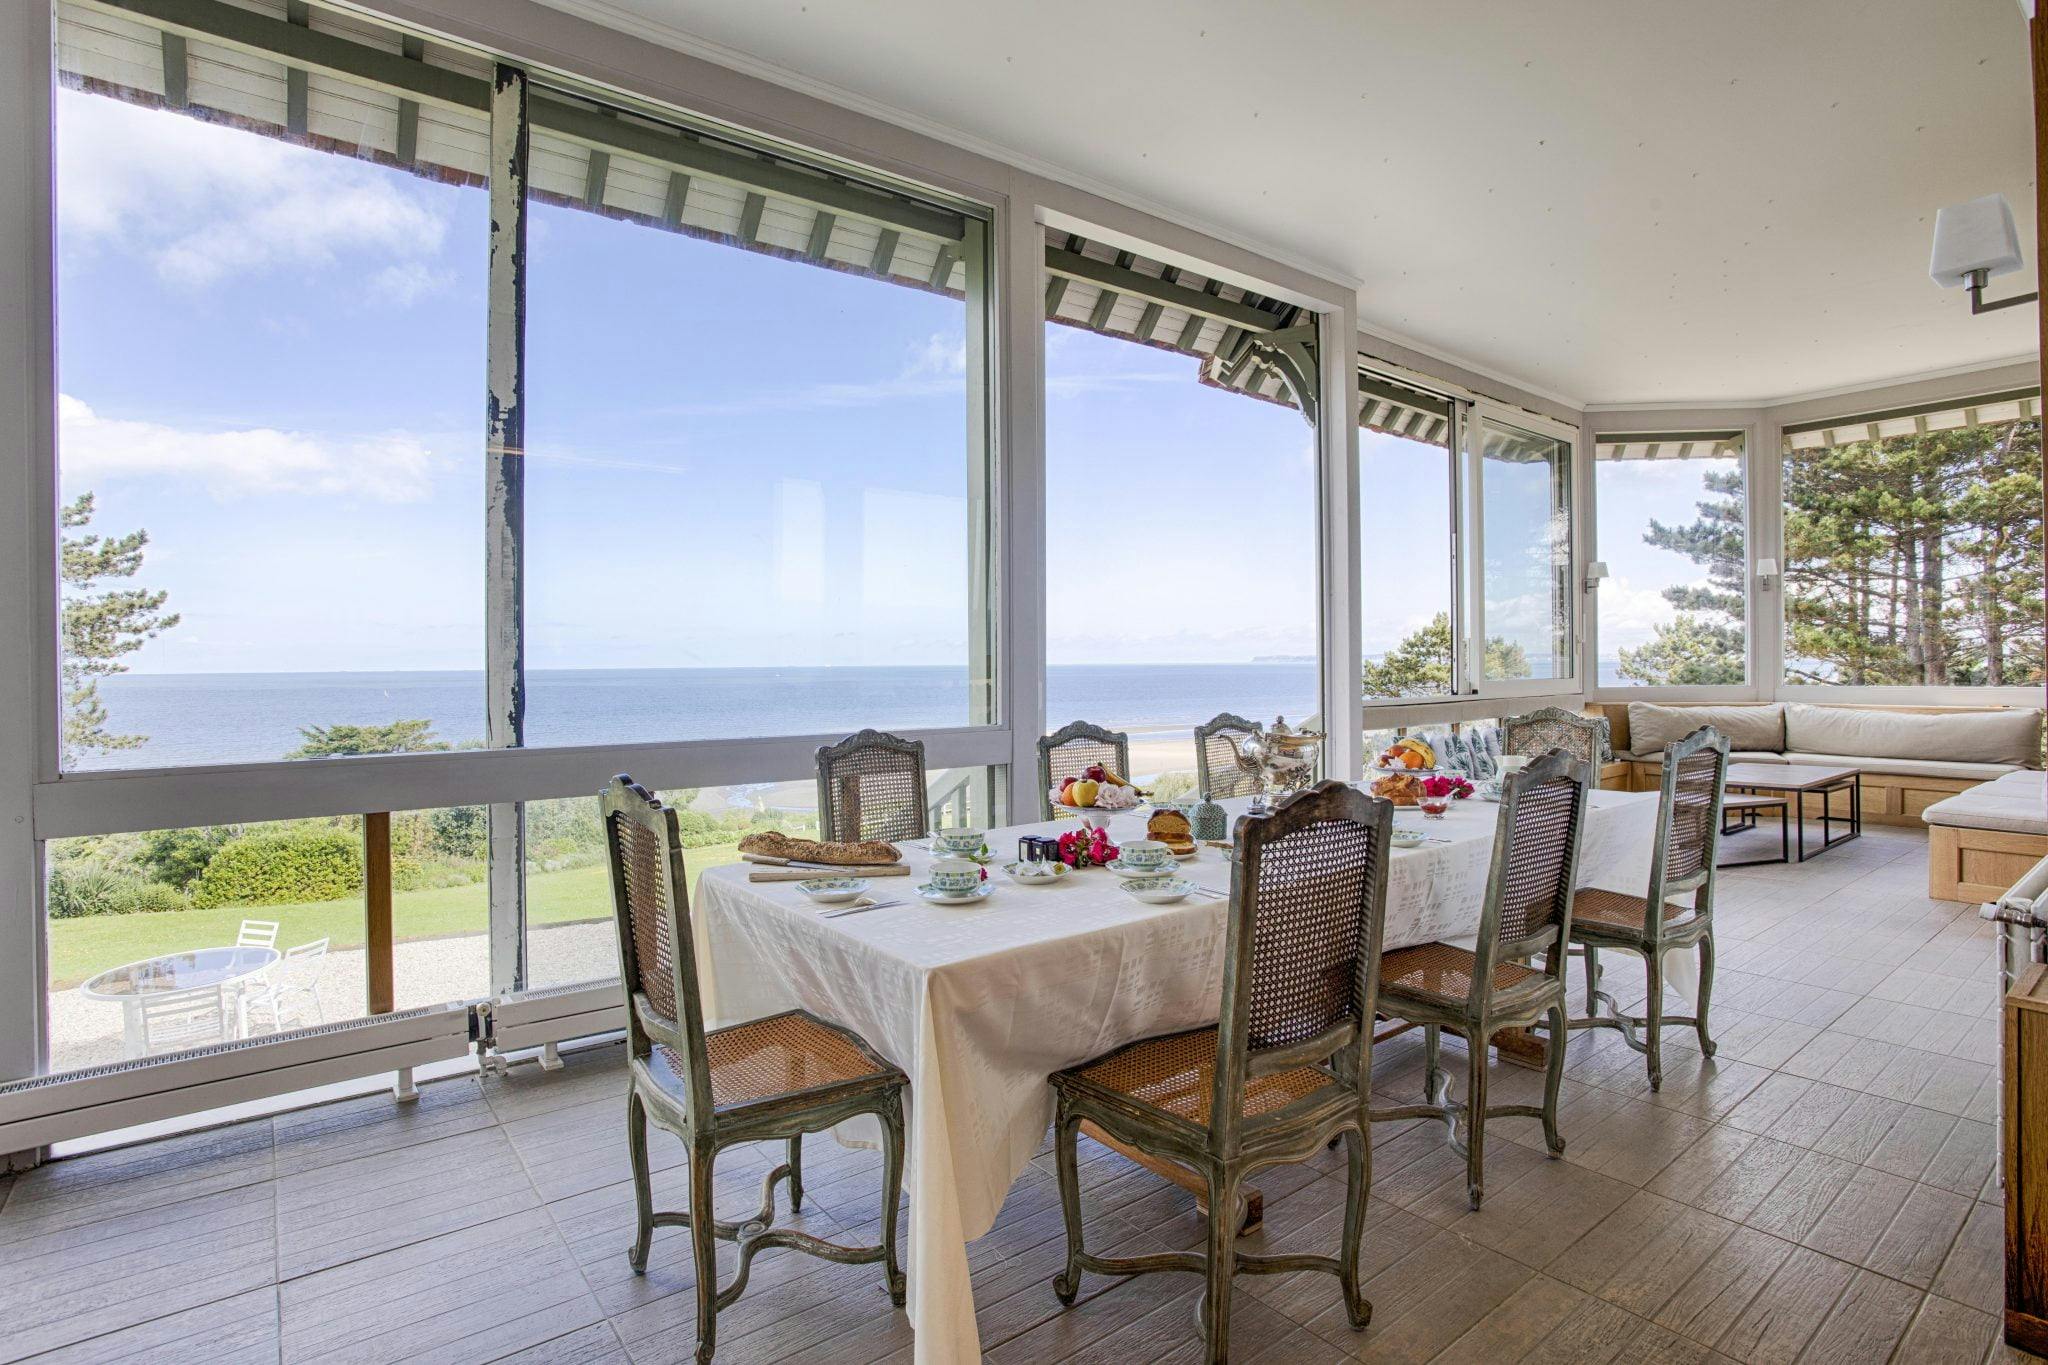 Dining room in front of large bay windows facing the sea